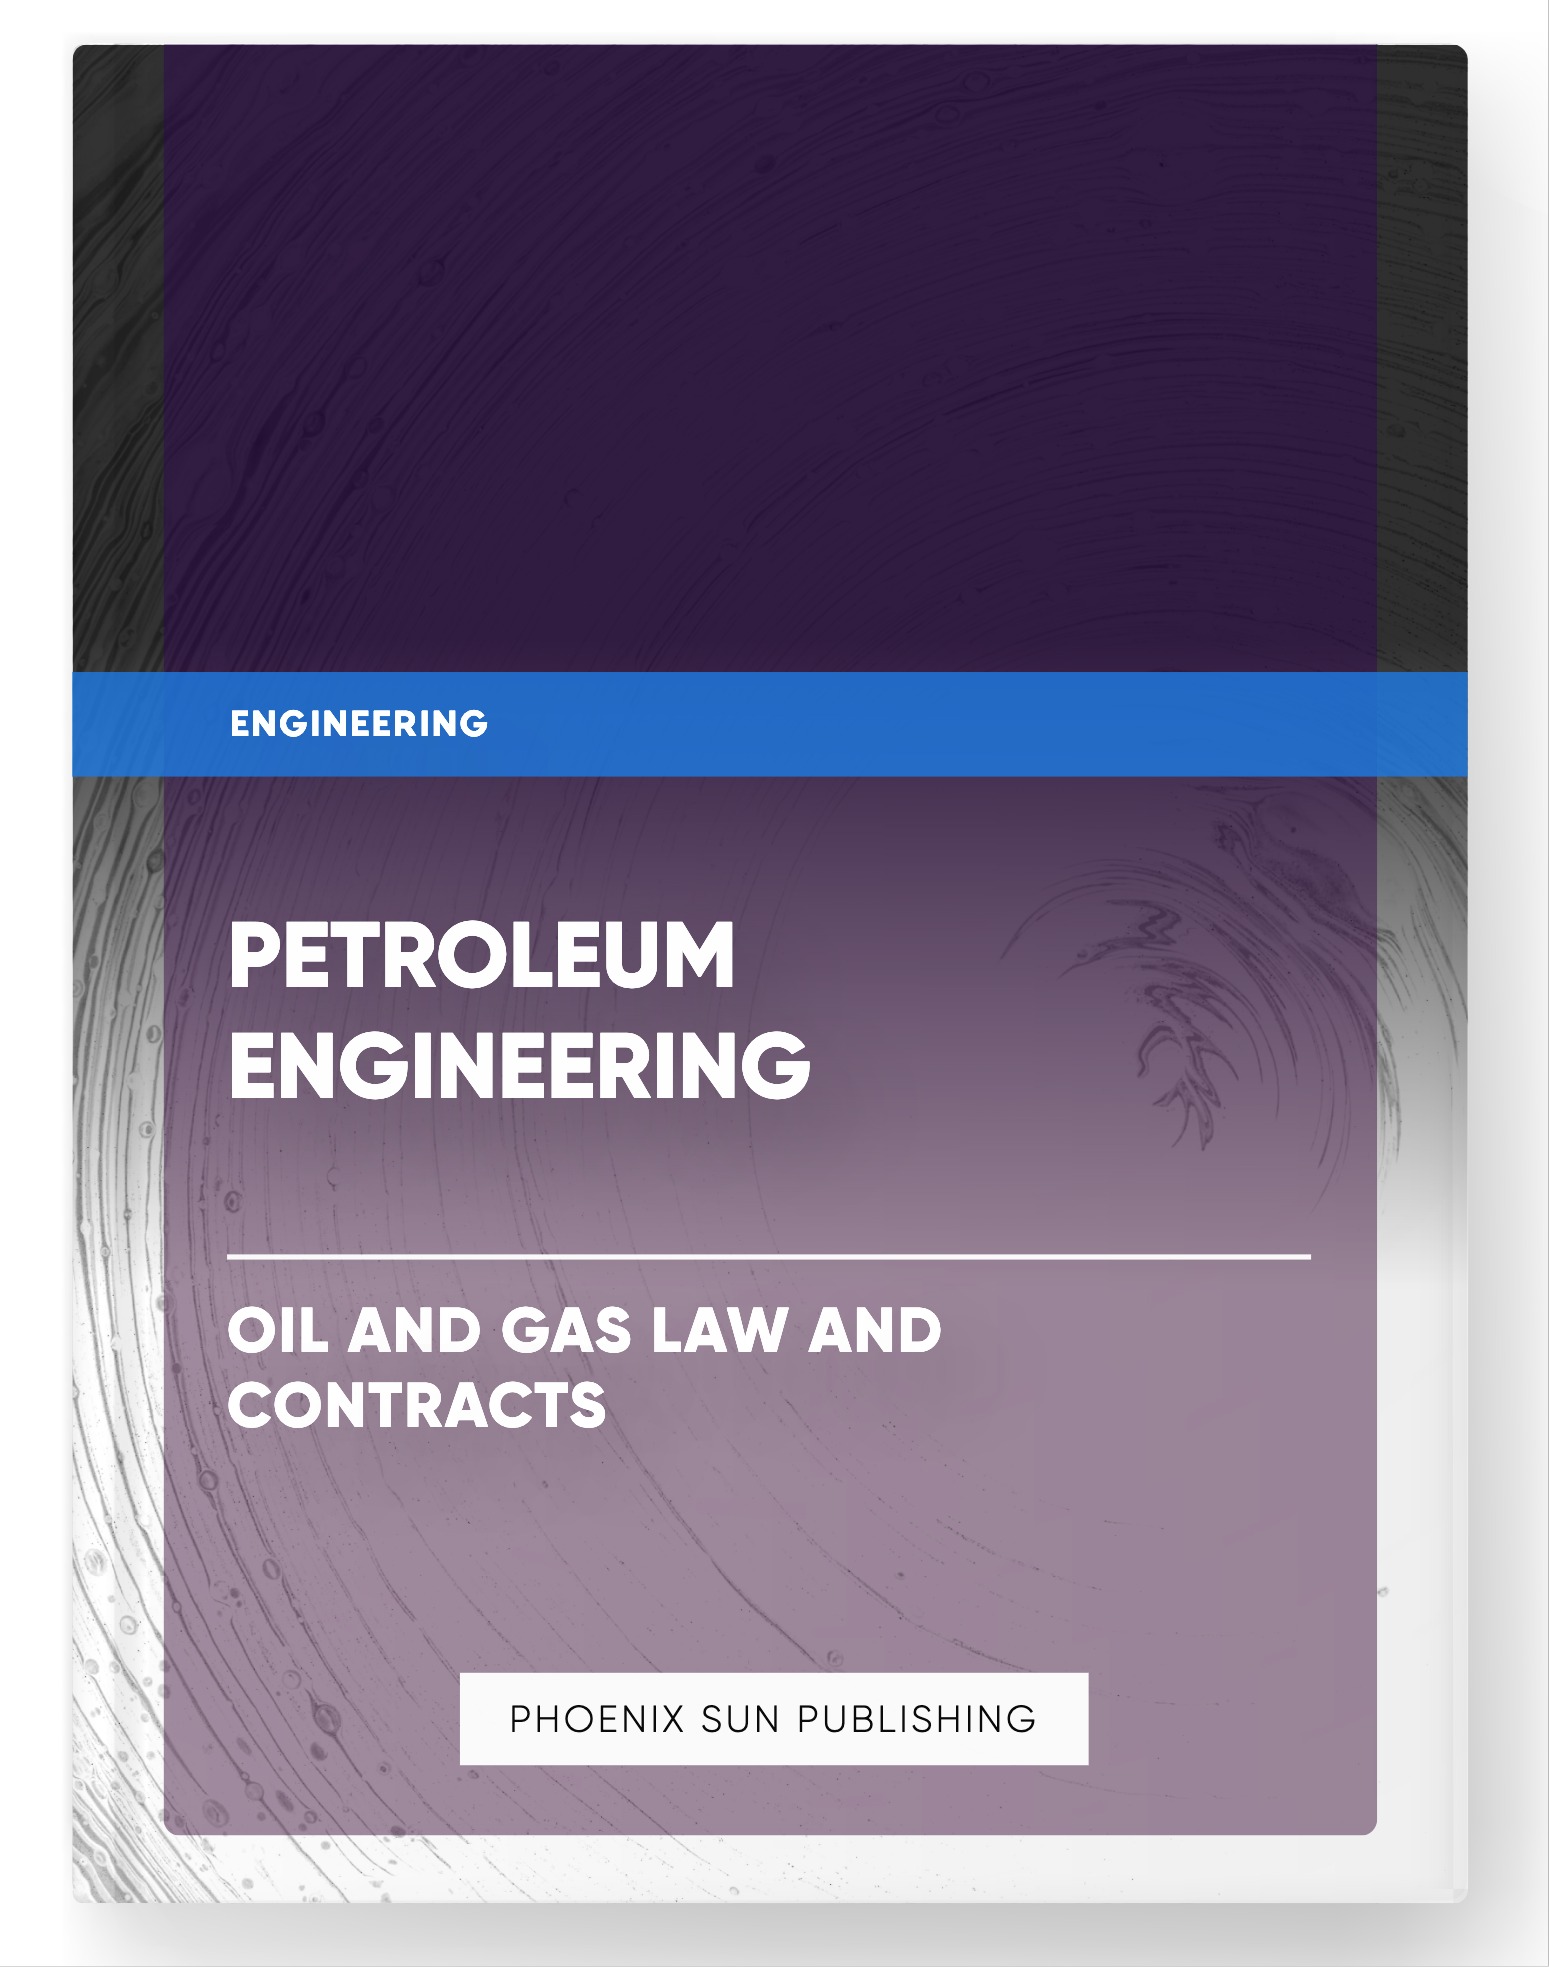 Petroleum Engineering – Oil and Gas Law and Contracts